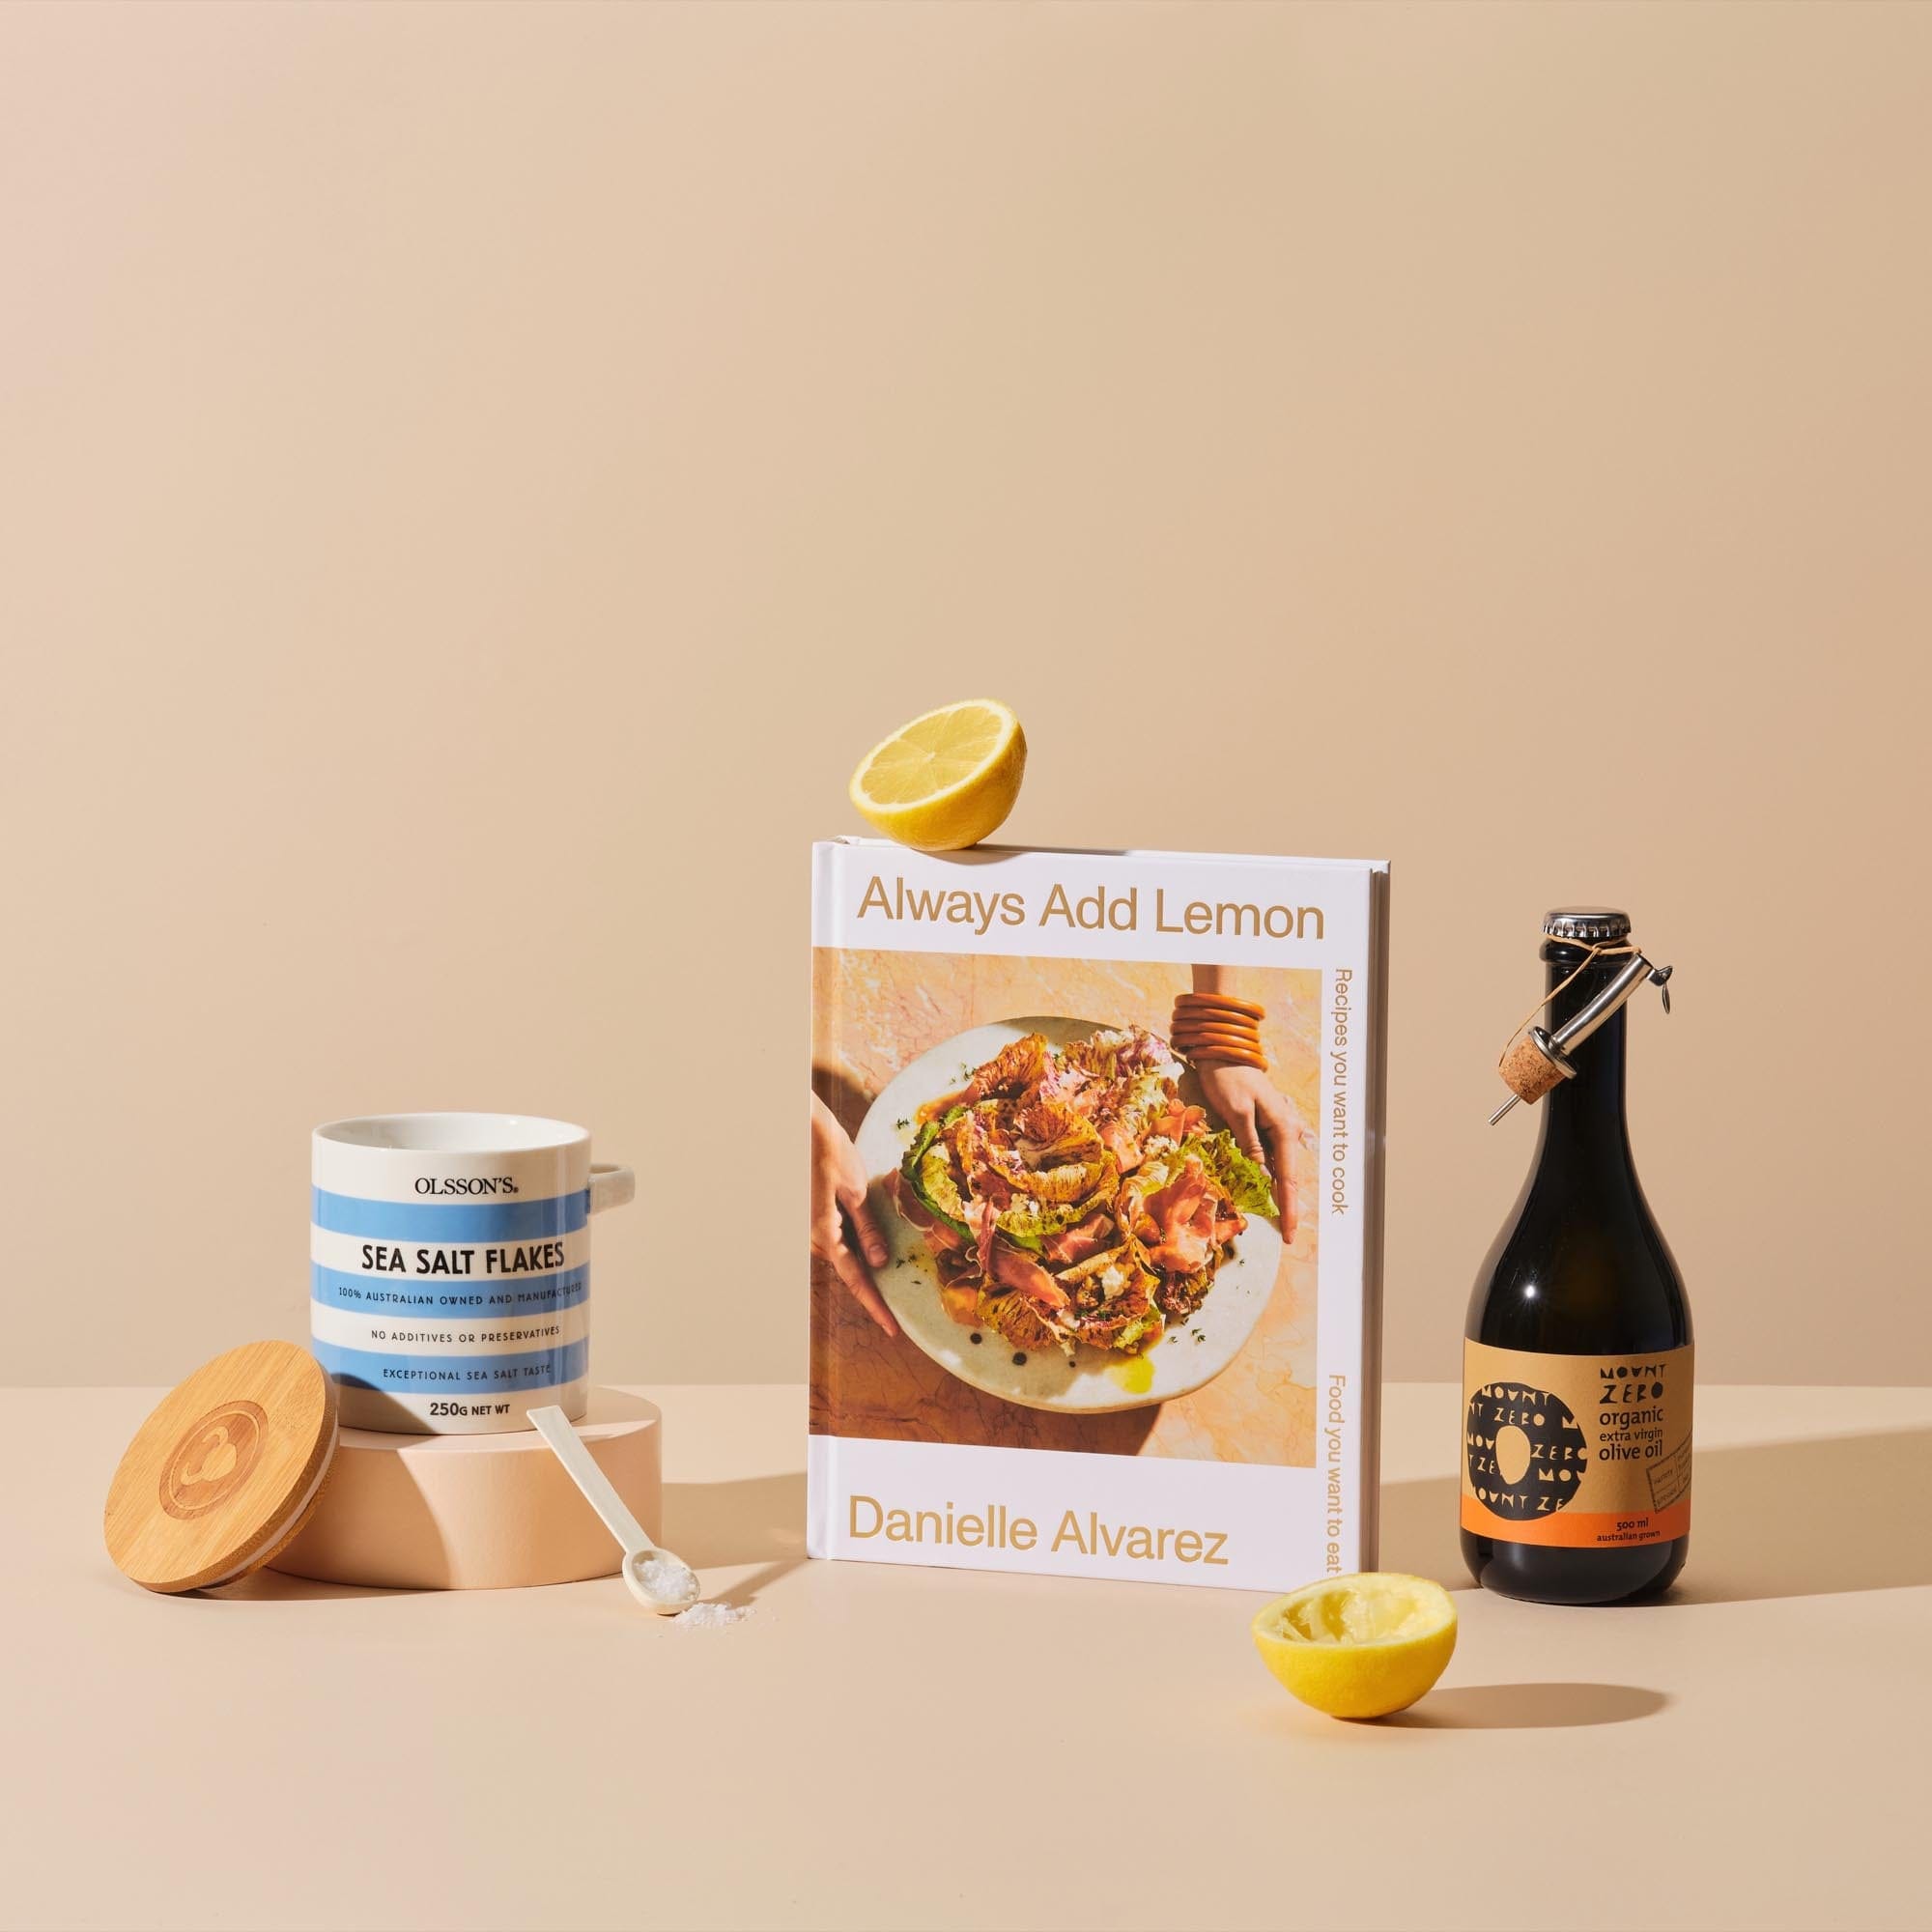 This is the Larder Love gift bundle from Handsel. Included in this image is Always Add Lemon, Olive oil and Sea salt flakes